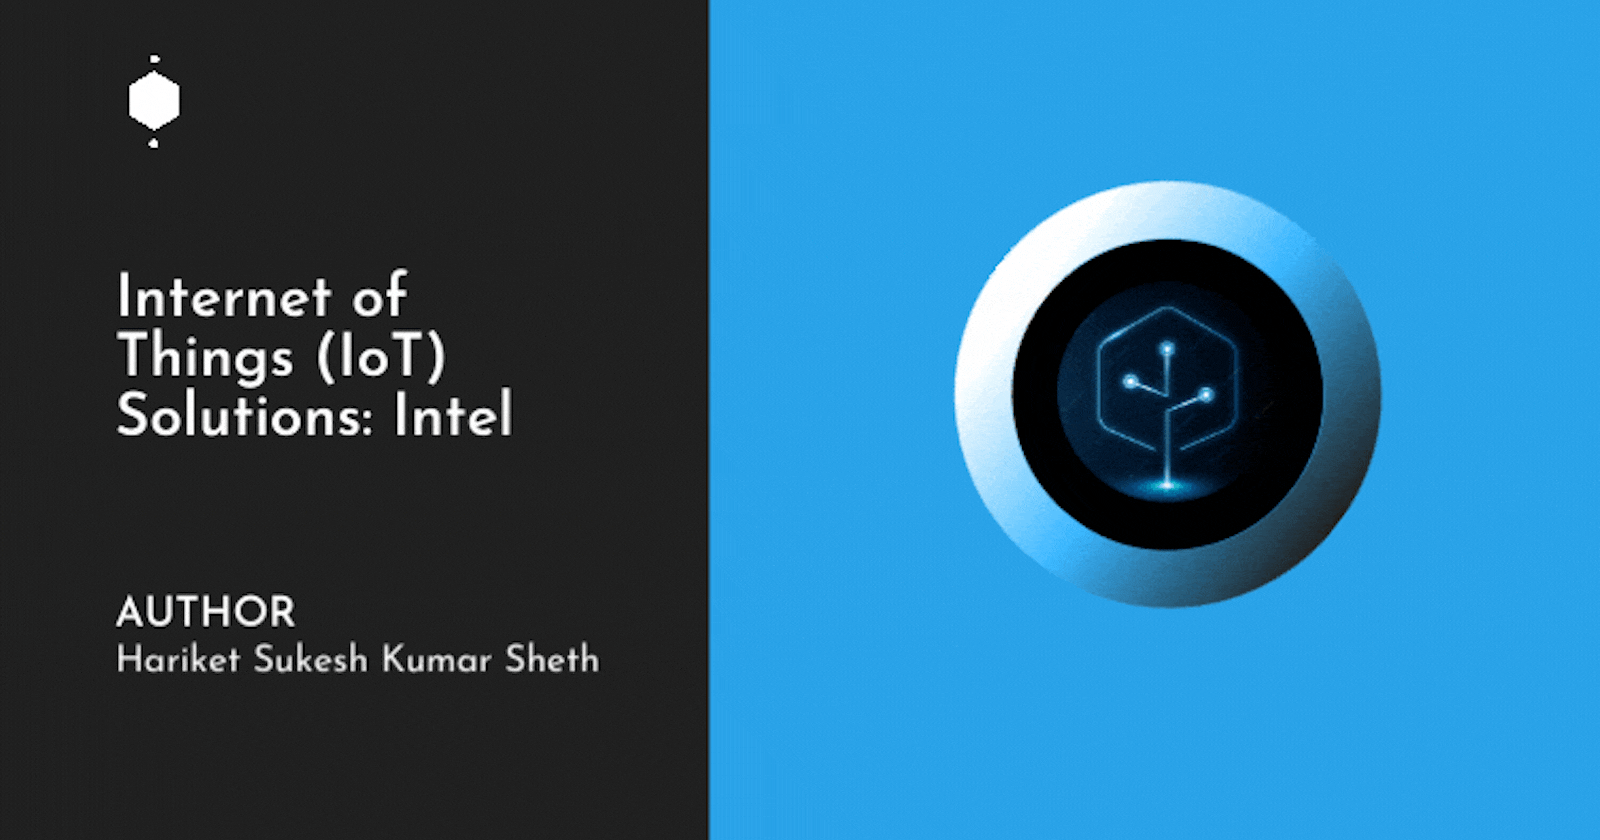 Internet of Things (IoT) Solutions: Intel